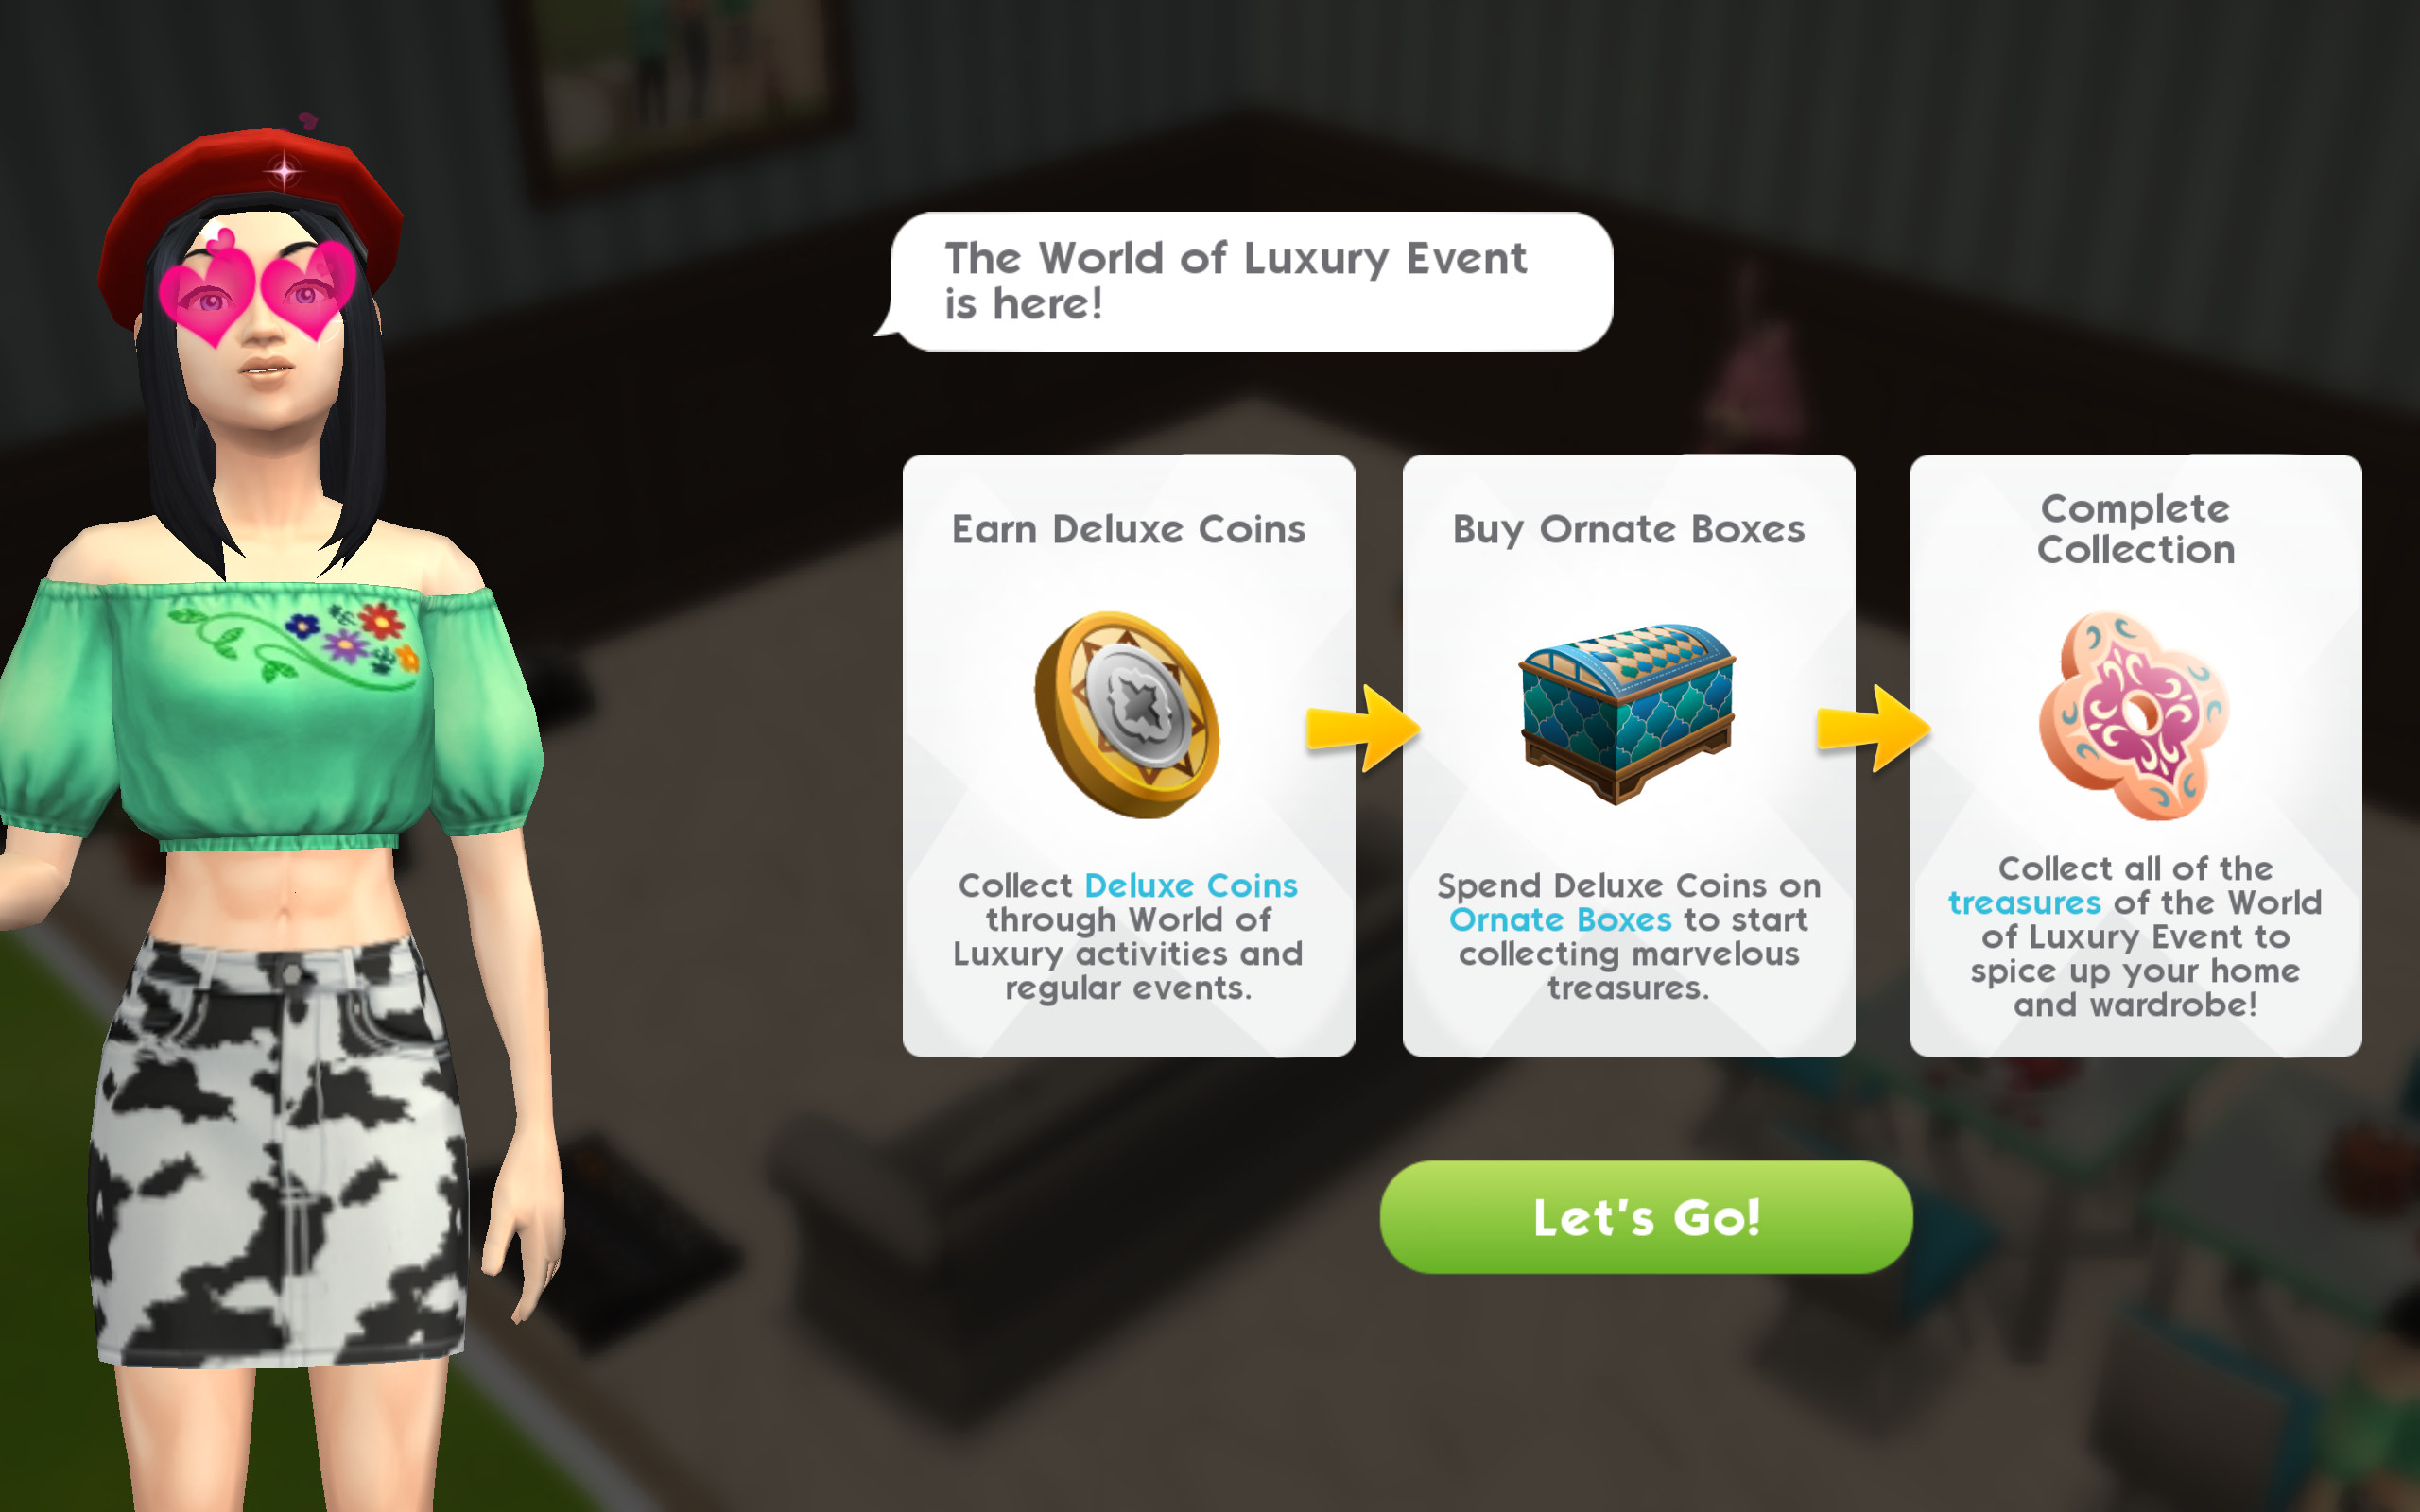 How To Complete the World of Luxury Event (Bubble Blower) in The Sims Mobile